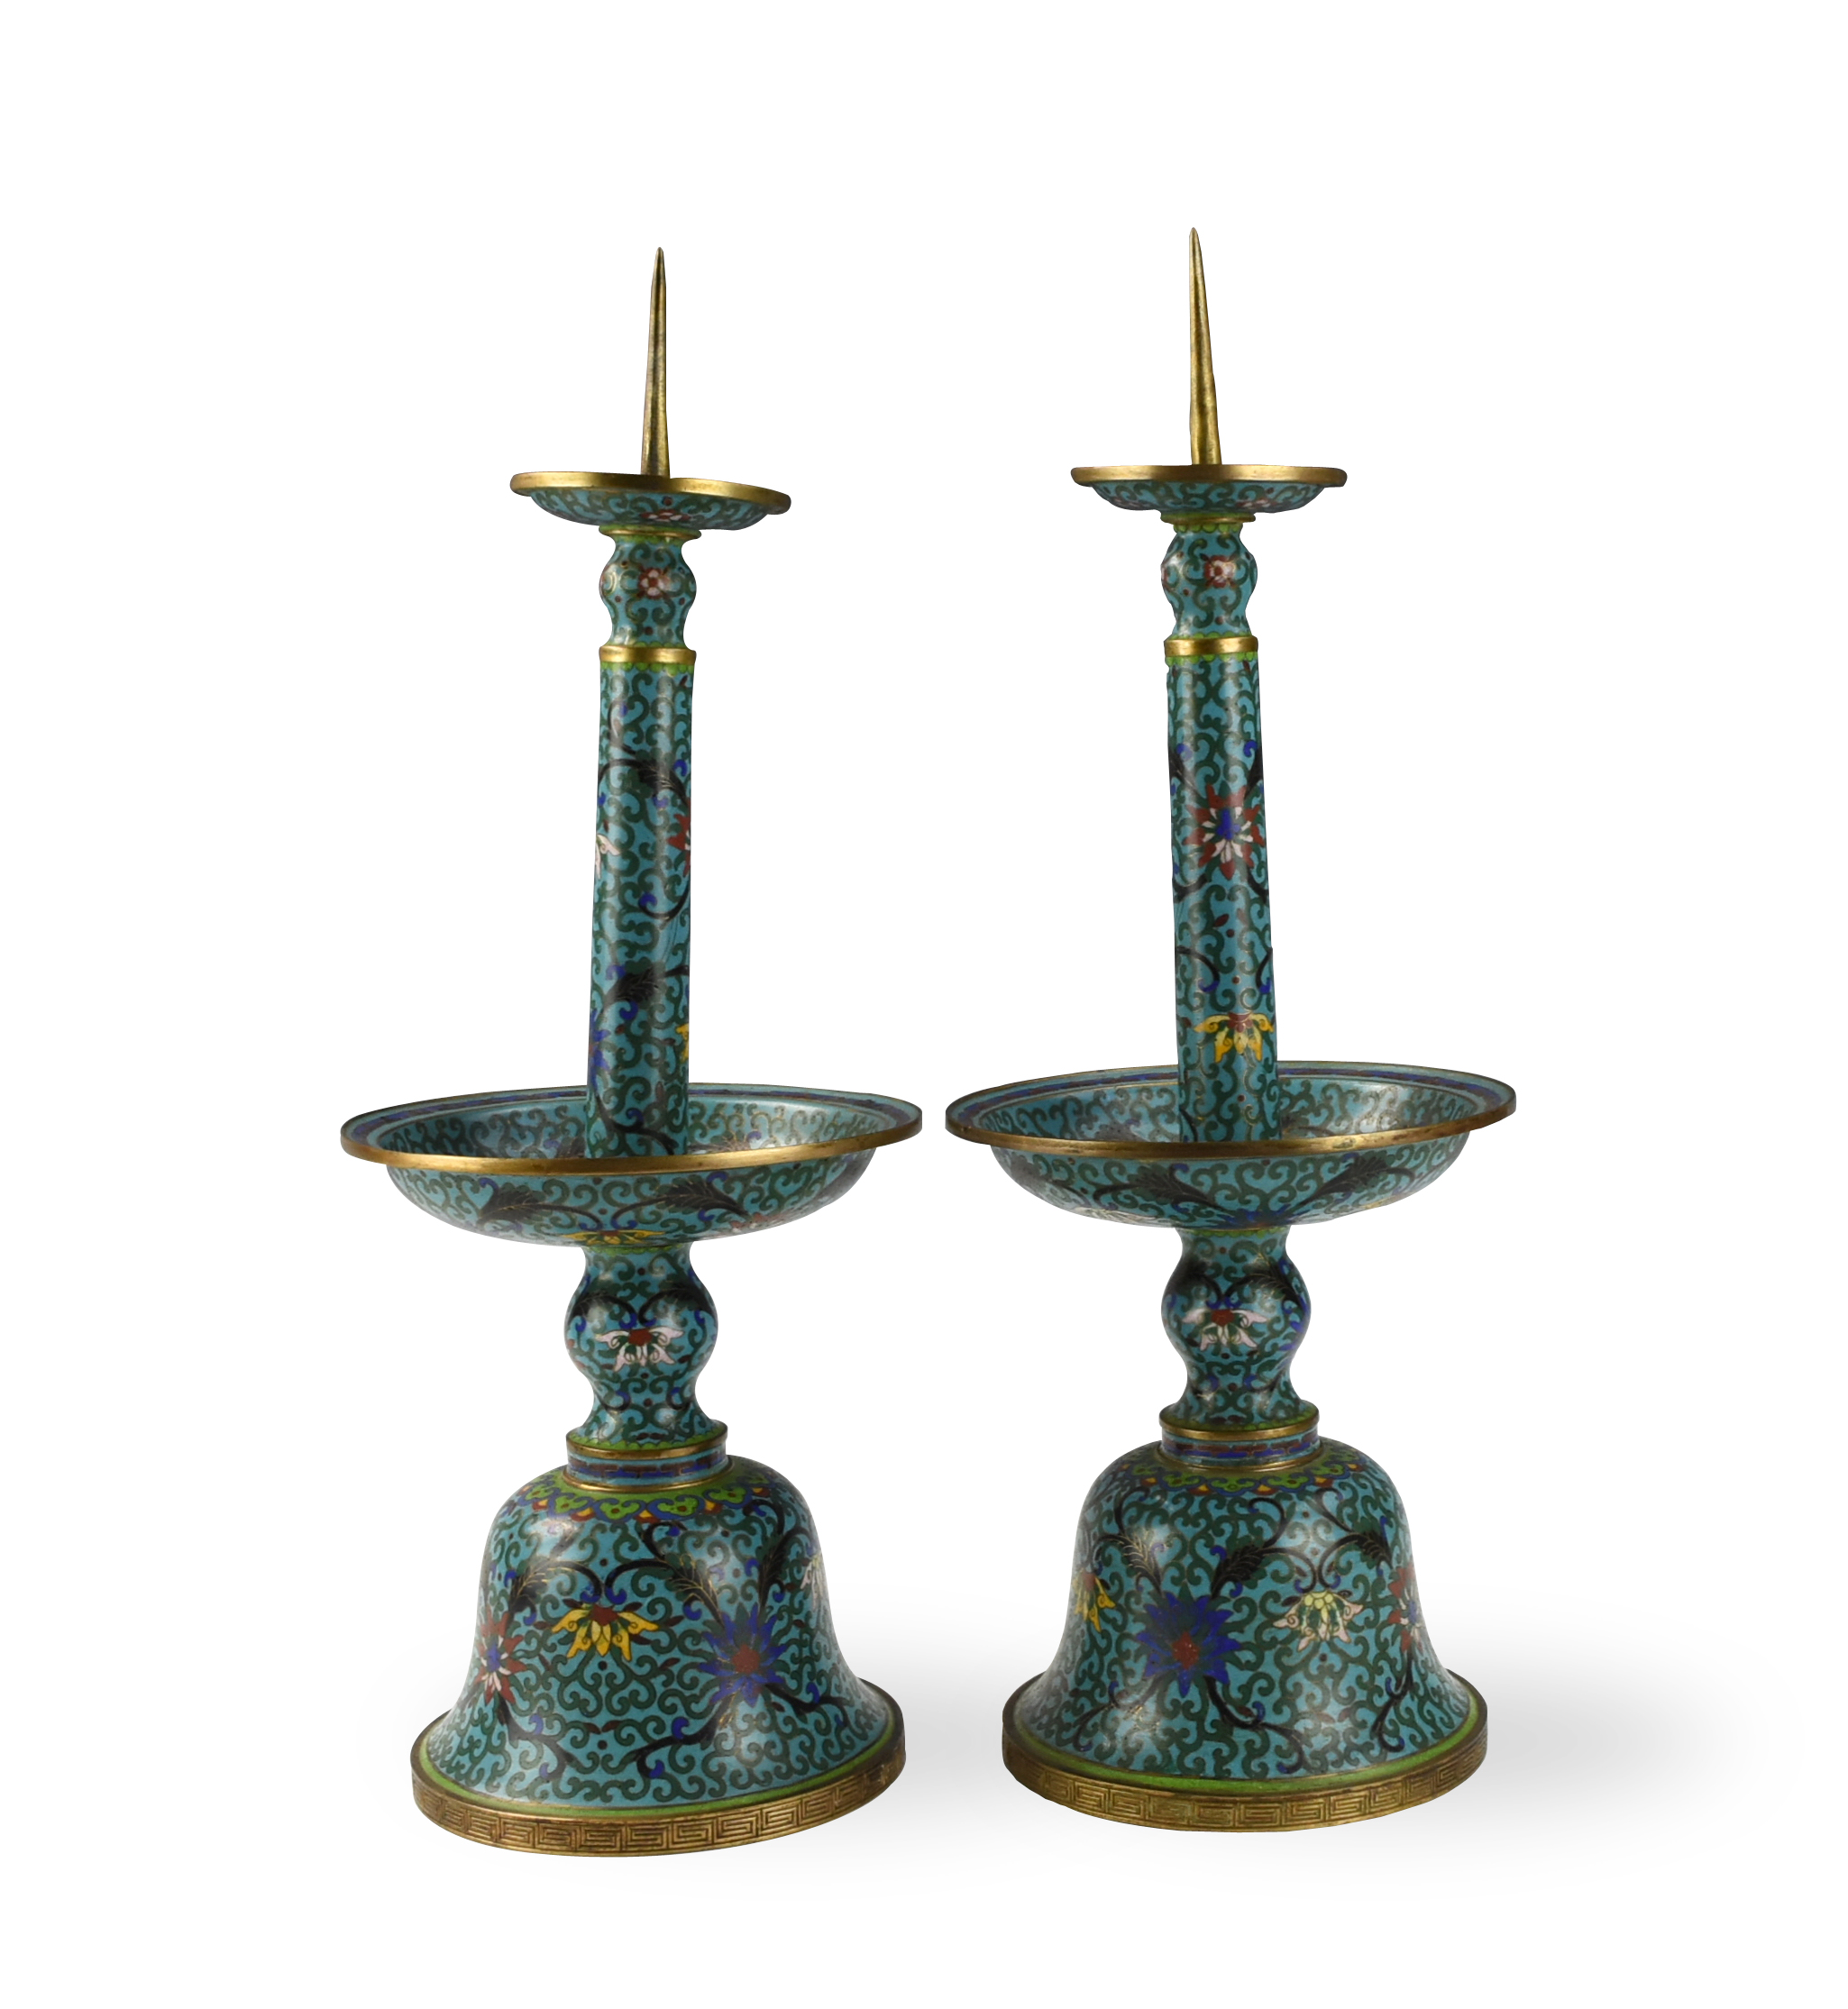 PAIR OF CHINESE CLOISONNE CANDLE 2ceab0